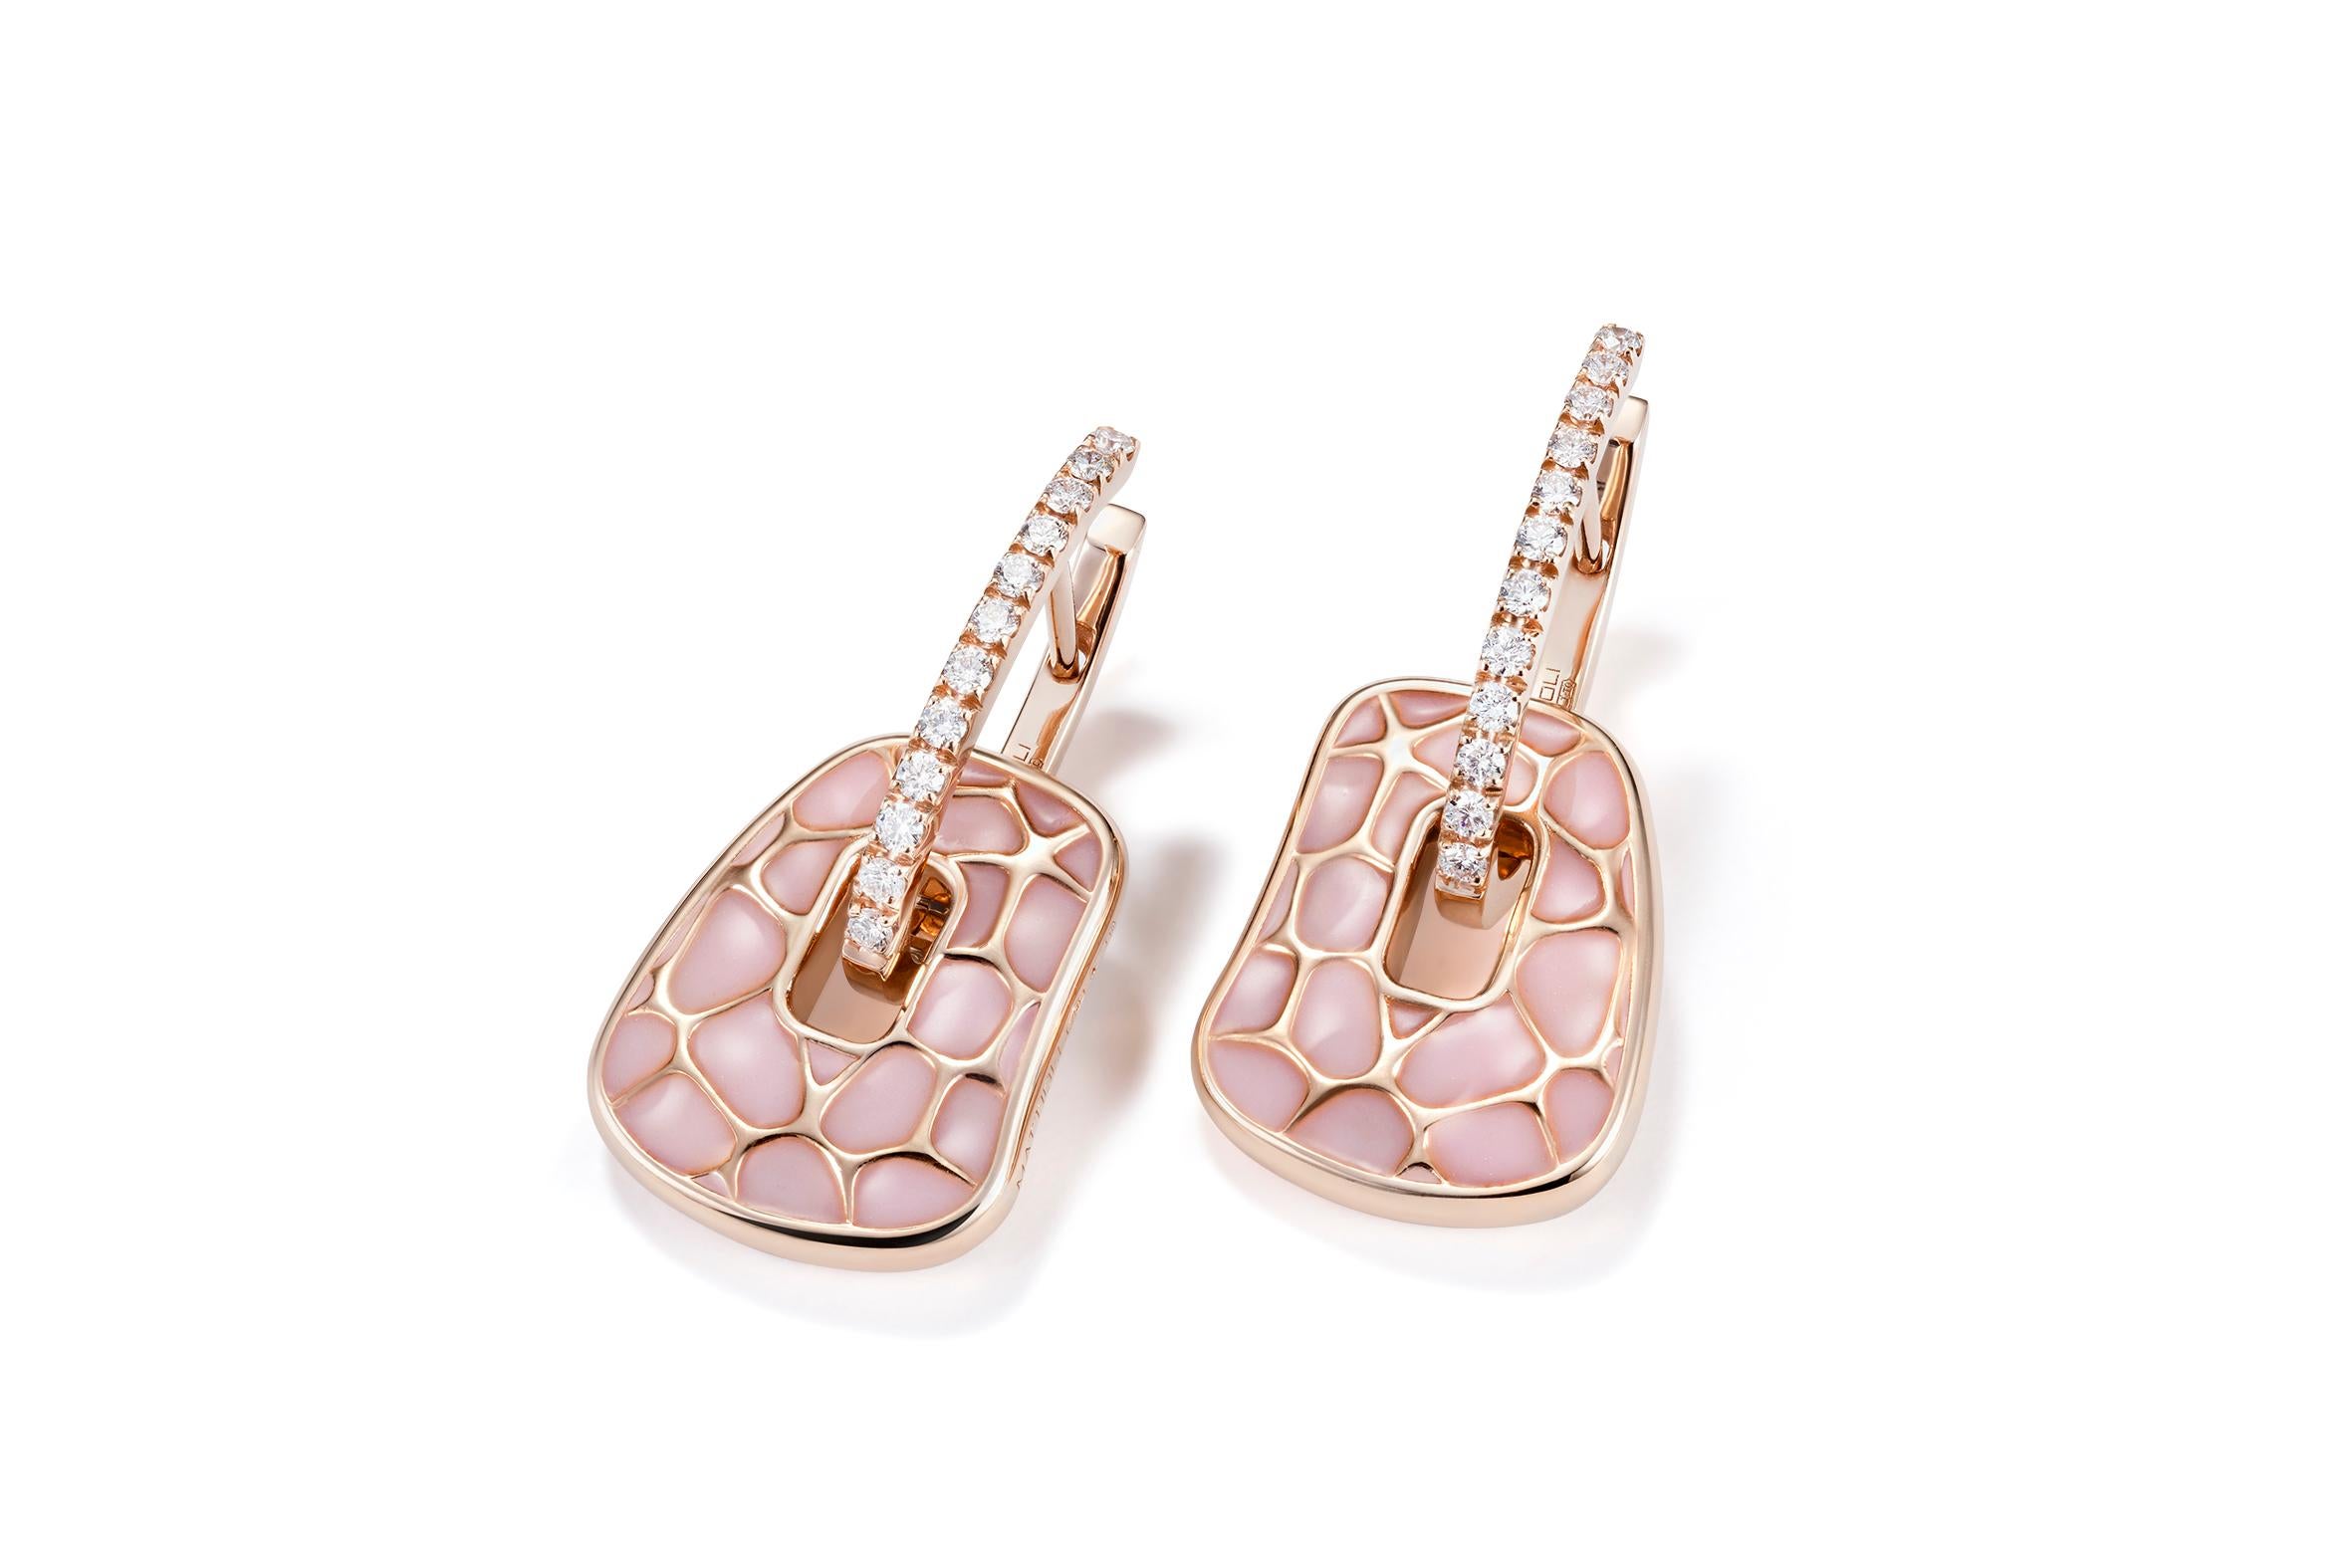 Mattioli Puzzle Safari Small 18K Rose Gold Earrings Pink Enamel and 2 Pendants
Earrings in Rose Gold and White Diamonds carat 0.34 ct
Weight 10.80 gr  Measure 15x18mm or 0,59x0,70 in
Puzzle pendants of mother of pearl you can choose between 25